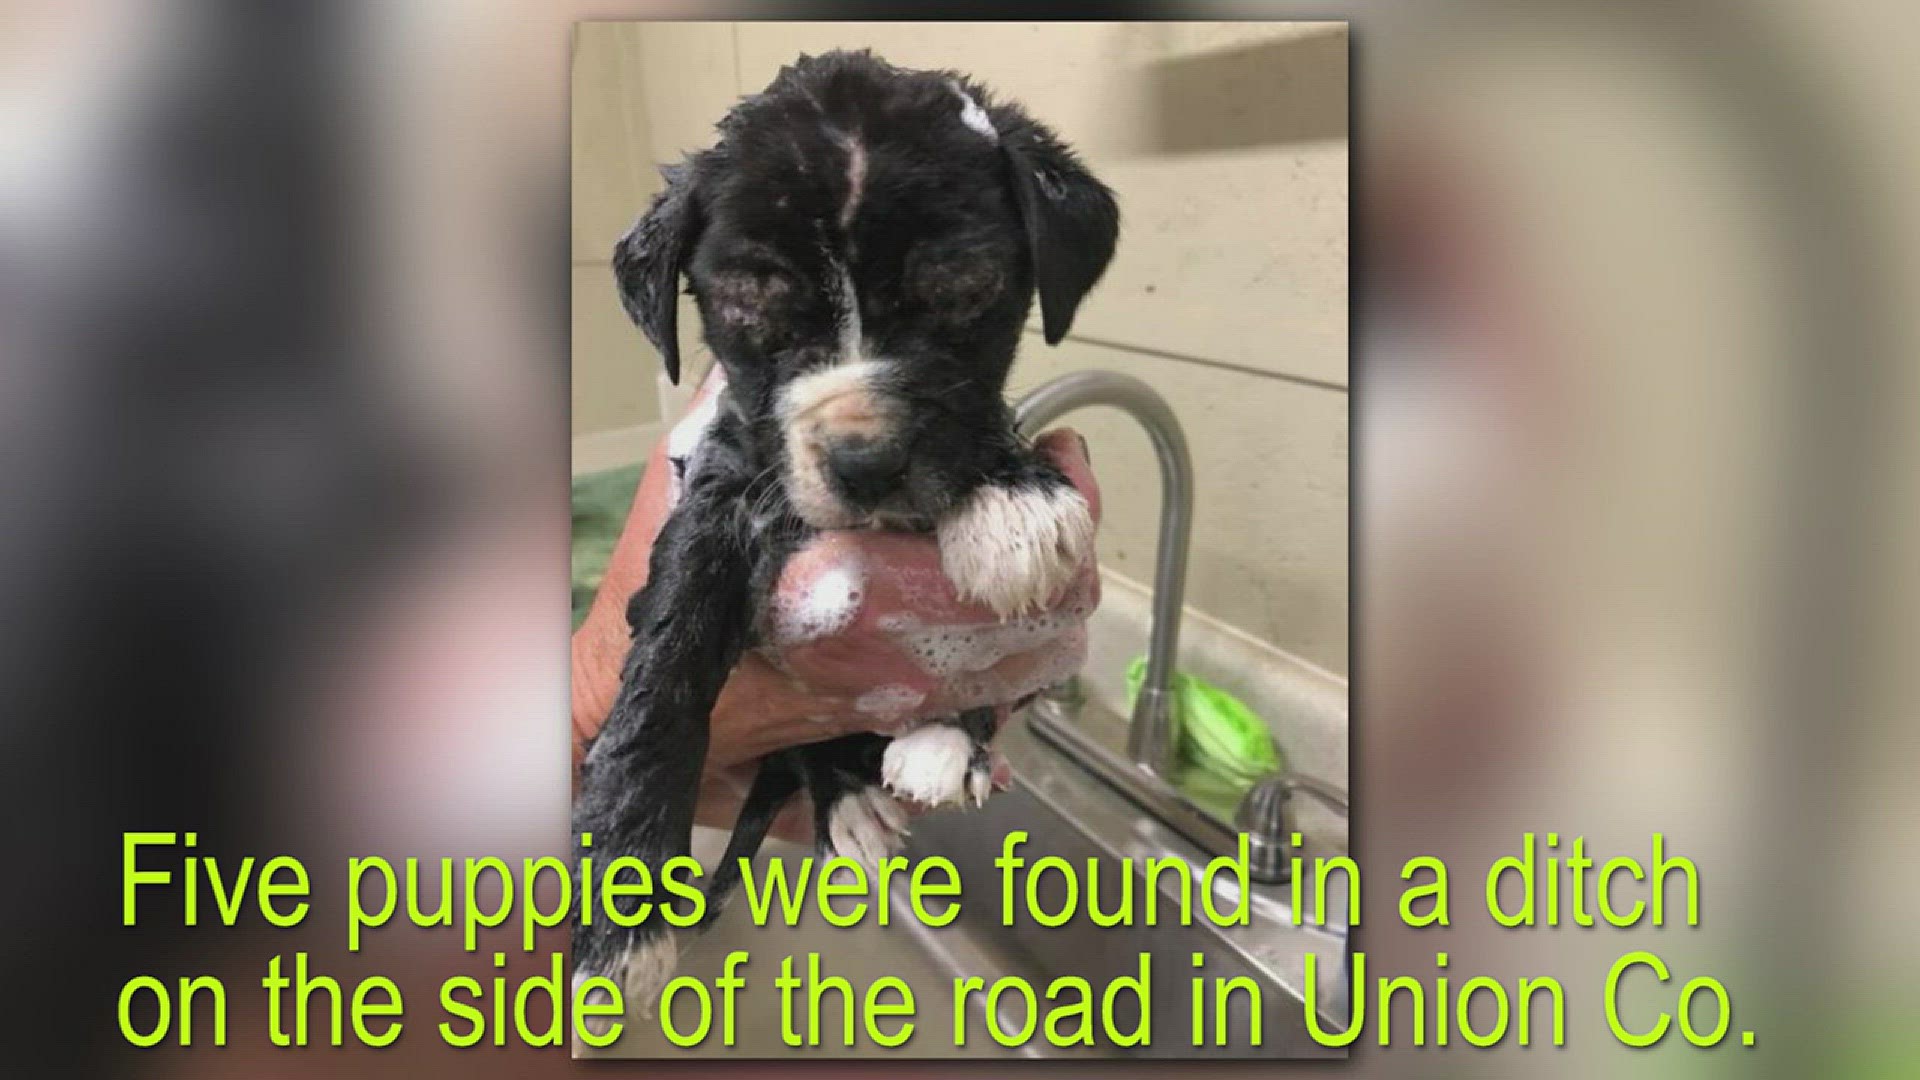 Five puppies found in a ditch in Union Co.